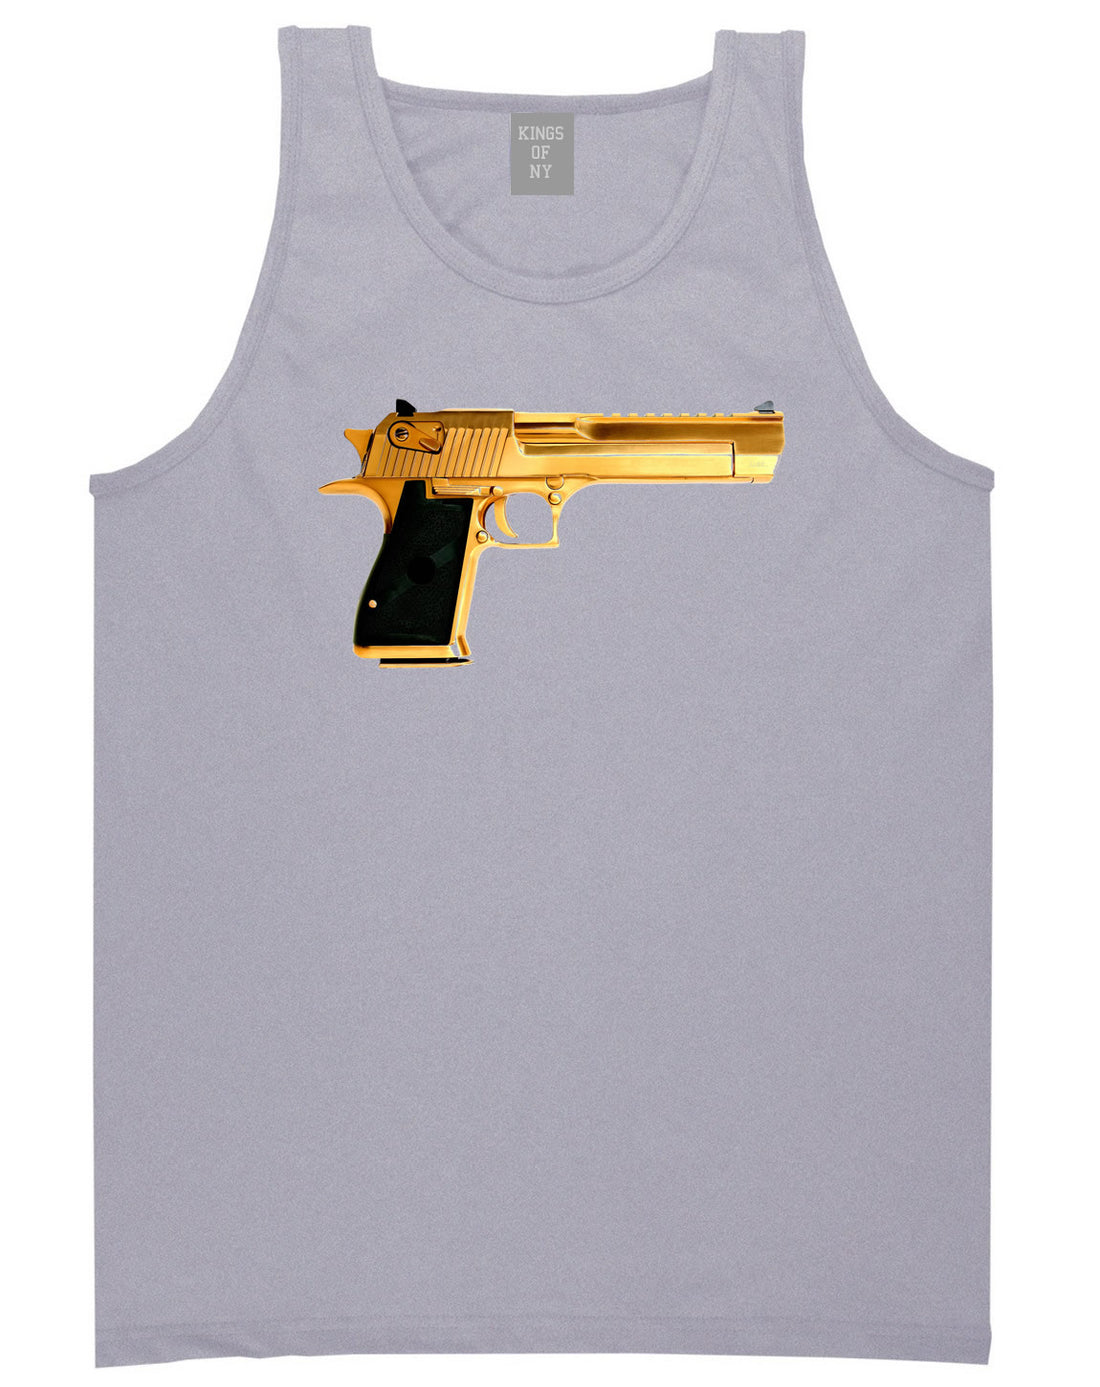 Gold Gun 9mm Revolver Chrome 45 Tank Top In Grey by Kings Of NY